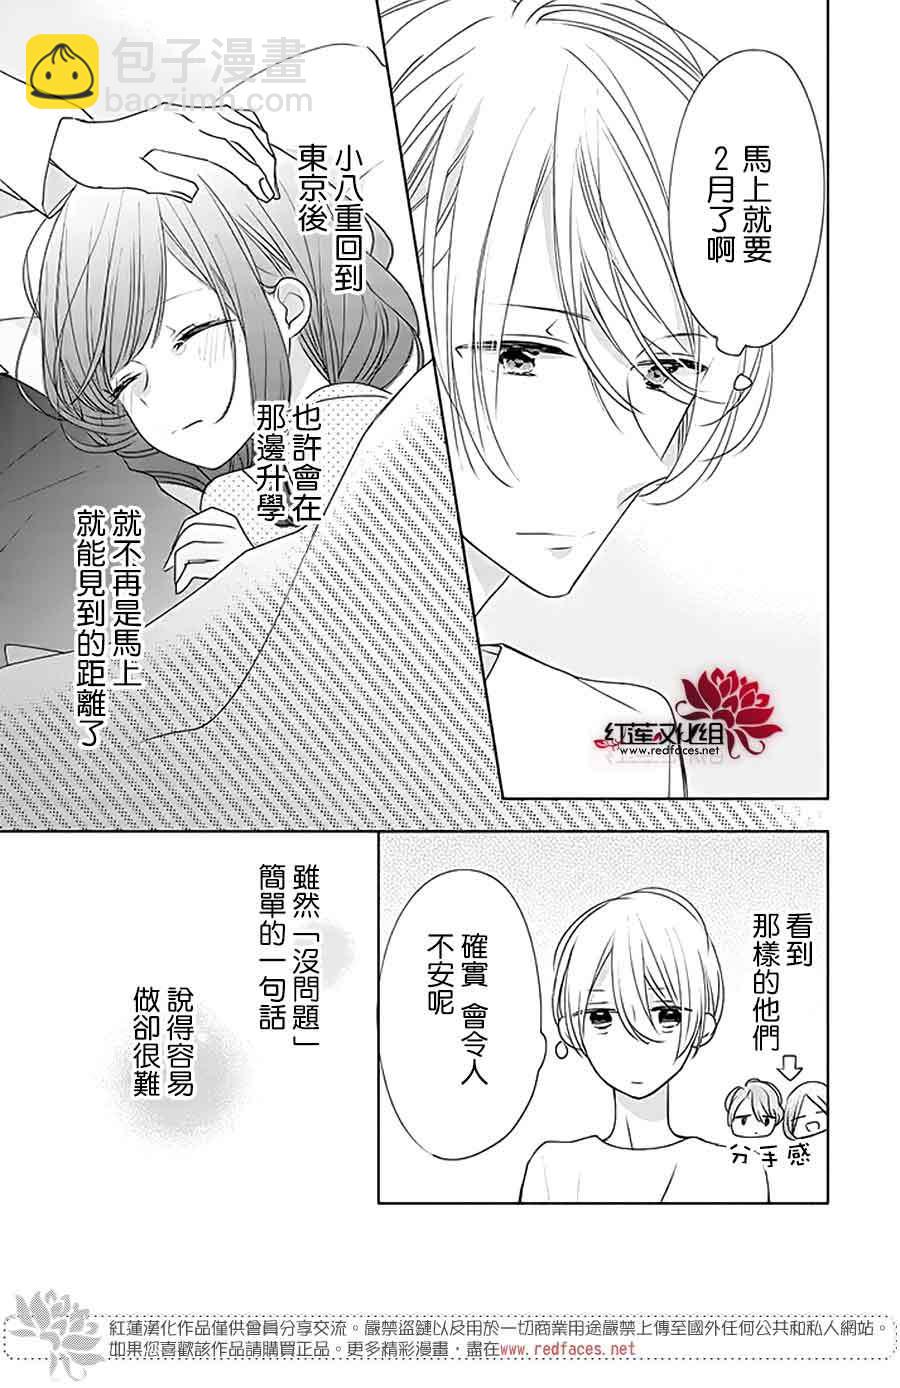 If given a second chance - 29話 - 5